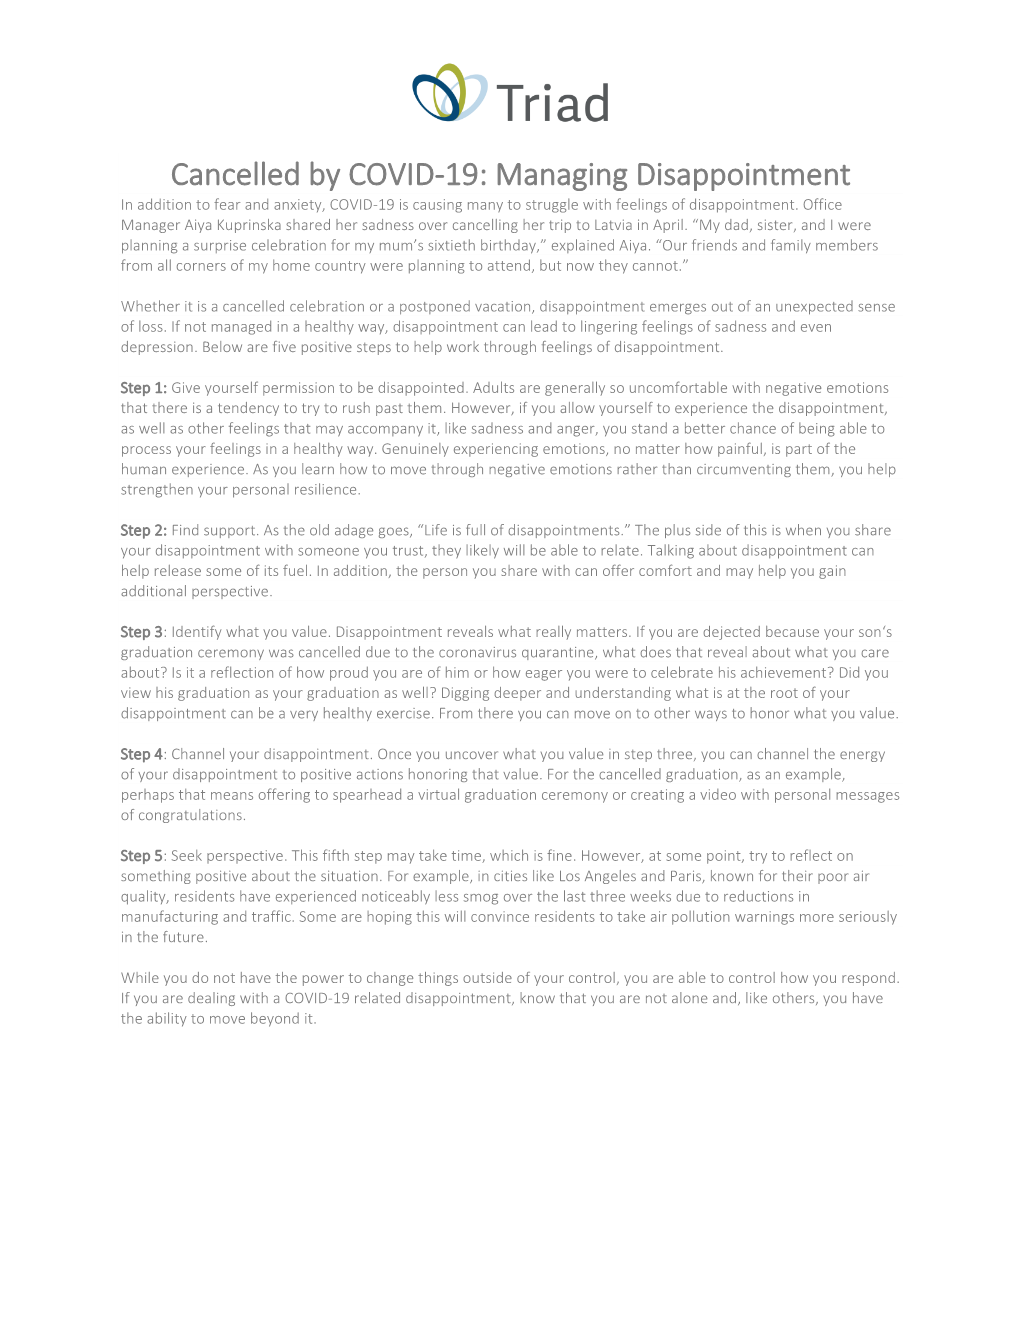 Cancelled by COVID-19: Managing Disappointment in Addition to Fear and Anxiety, COVID-19 Is Causing Many to Struggle with Feelings of Disappointment